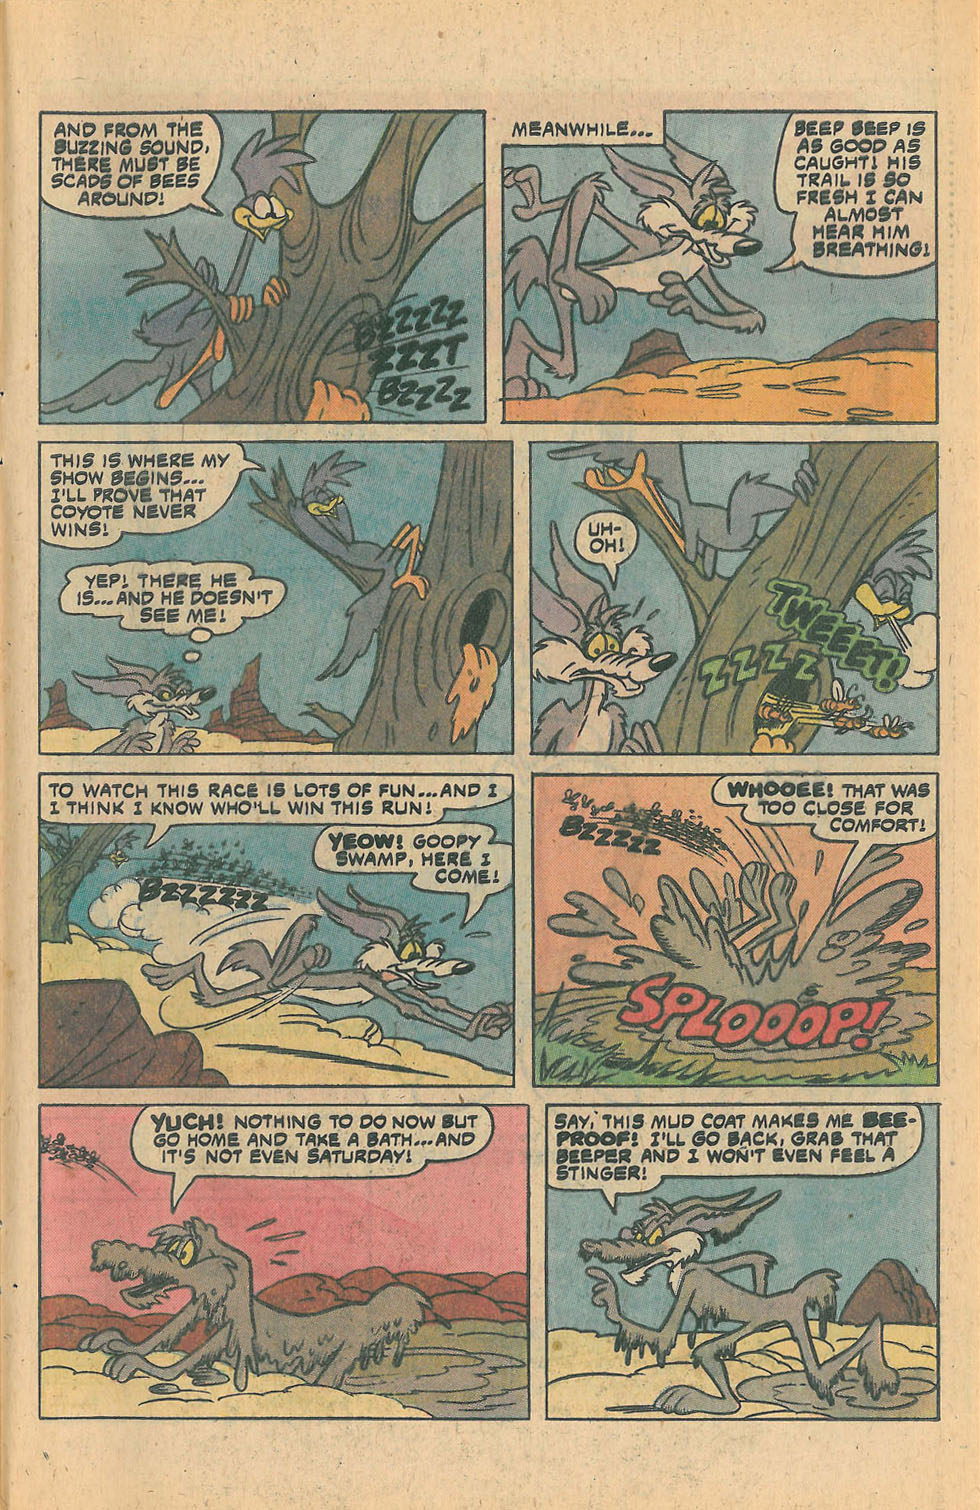 Read online Beep Beep The Road Runner comic -  Issue #82 - 29